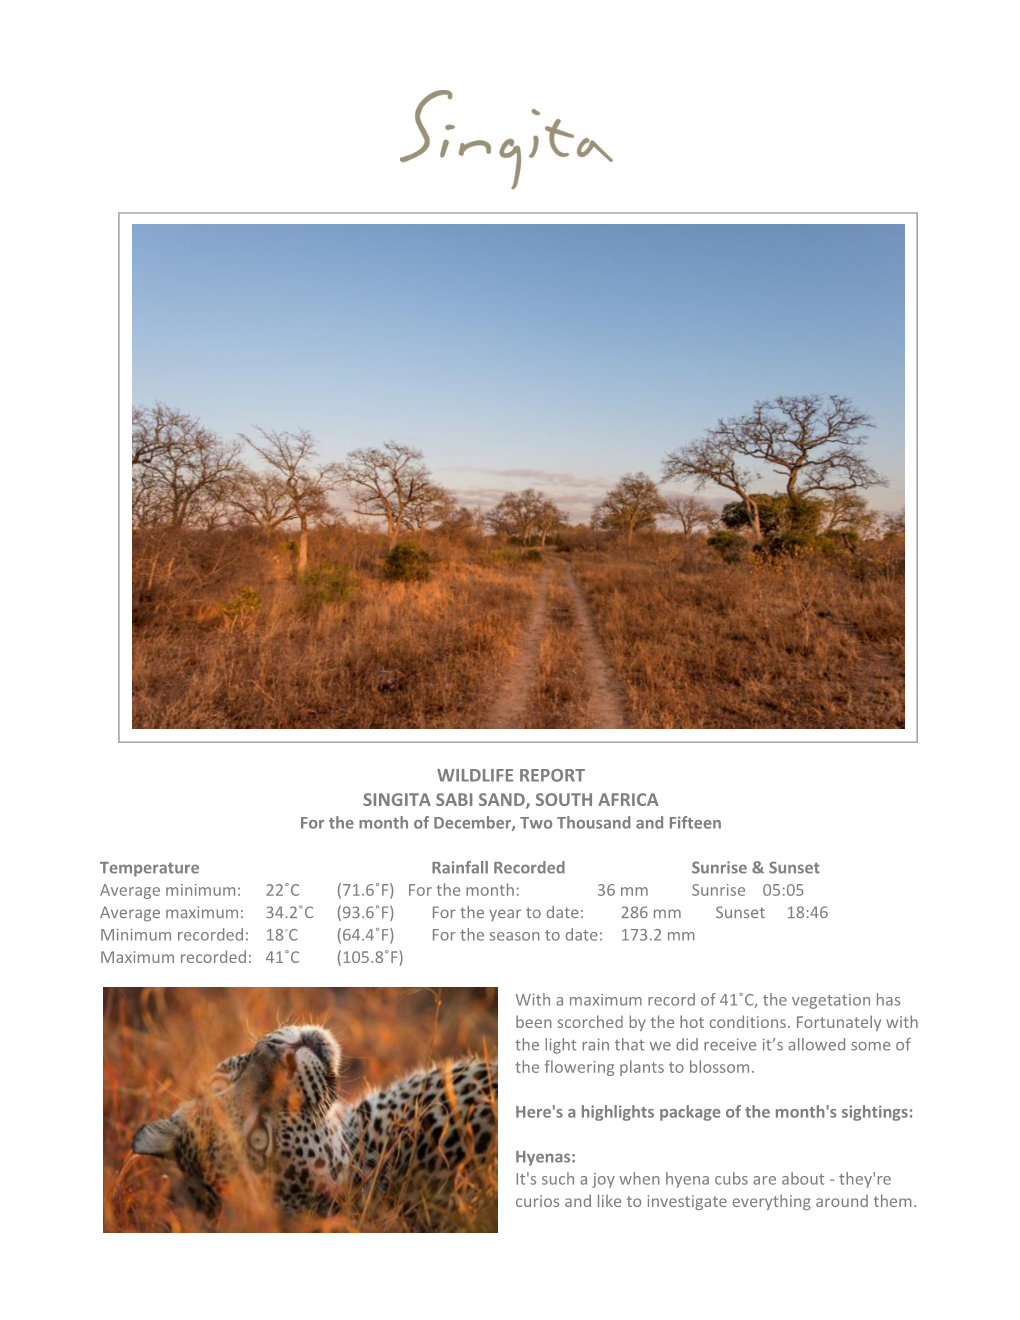 SINGITA SABI SAND, SOUTH AFRICA for the Month of December, Two Thousand and Fifteen